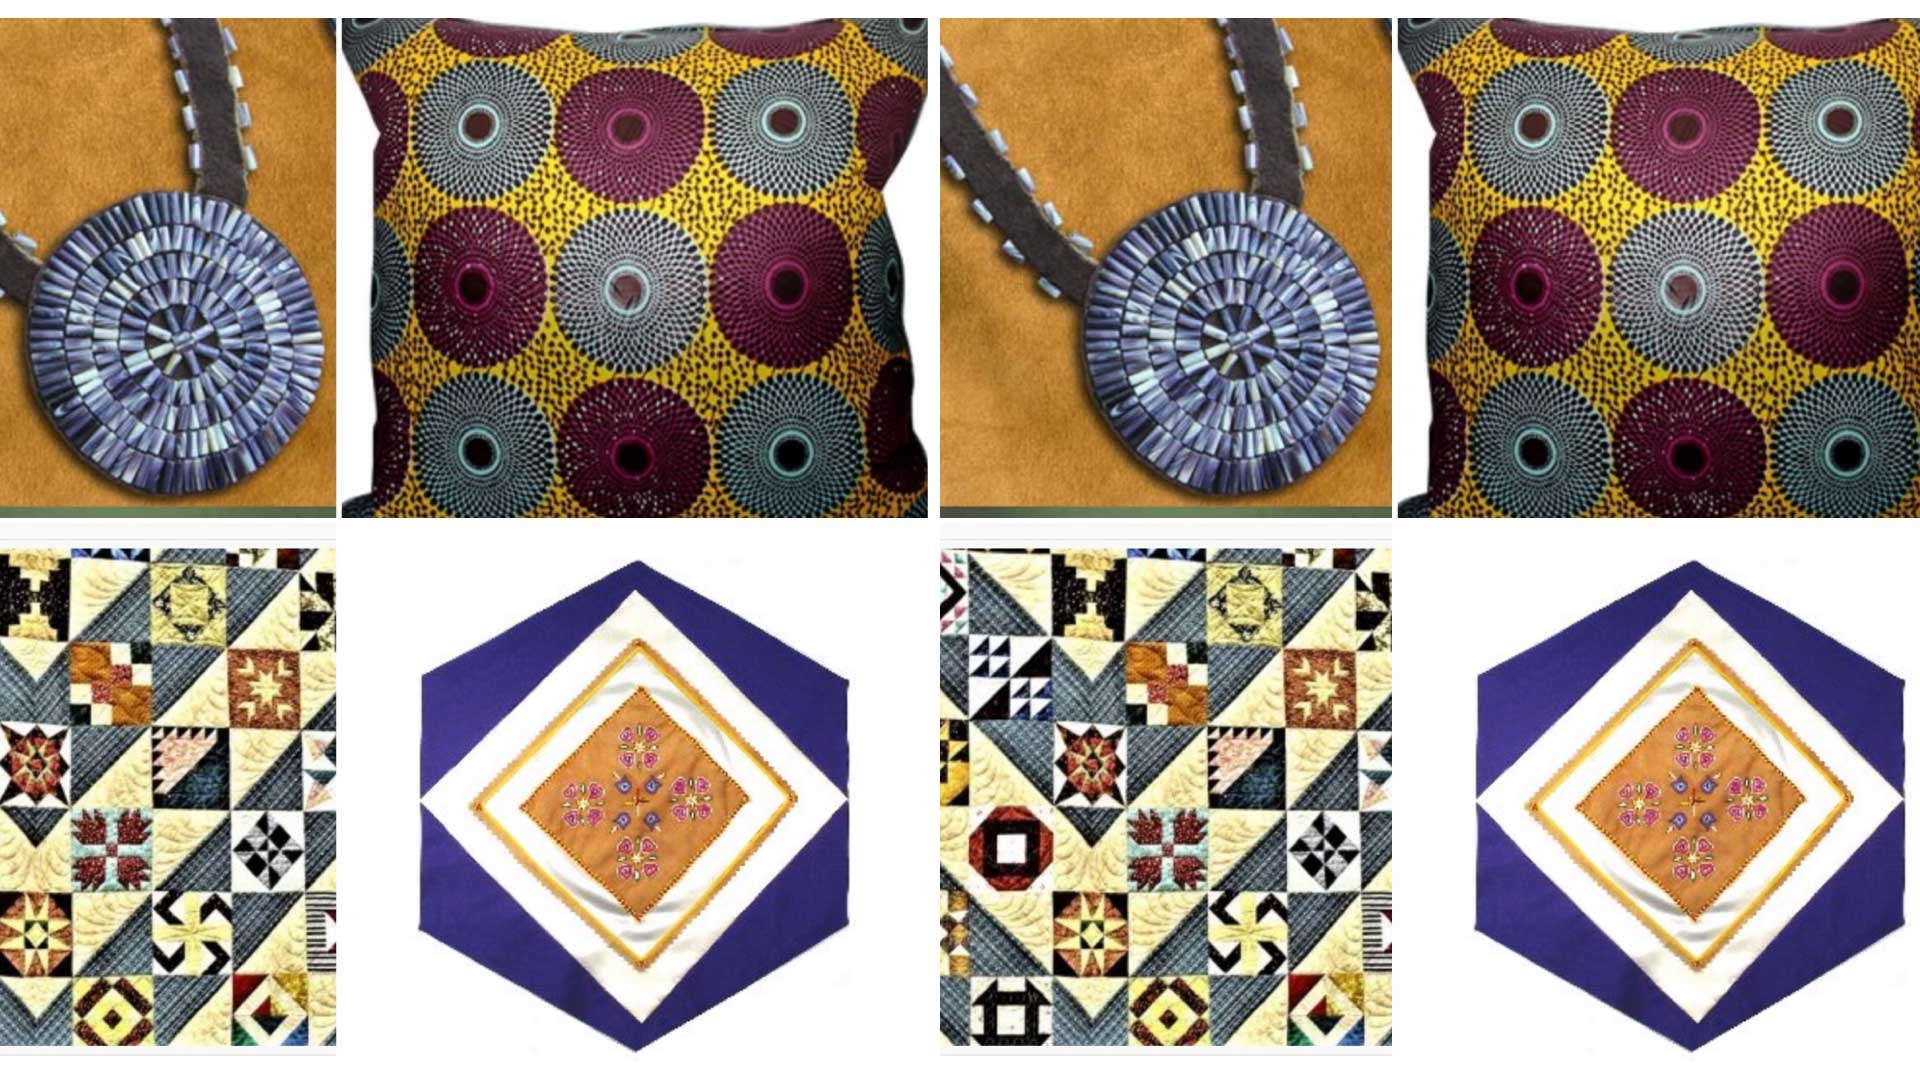 Black-Indigenous American fabric and jewelry